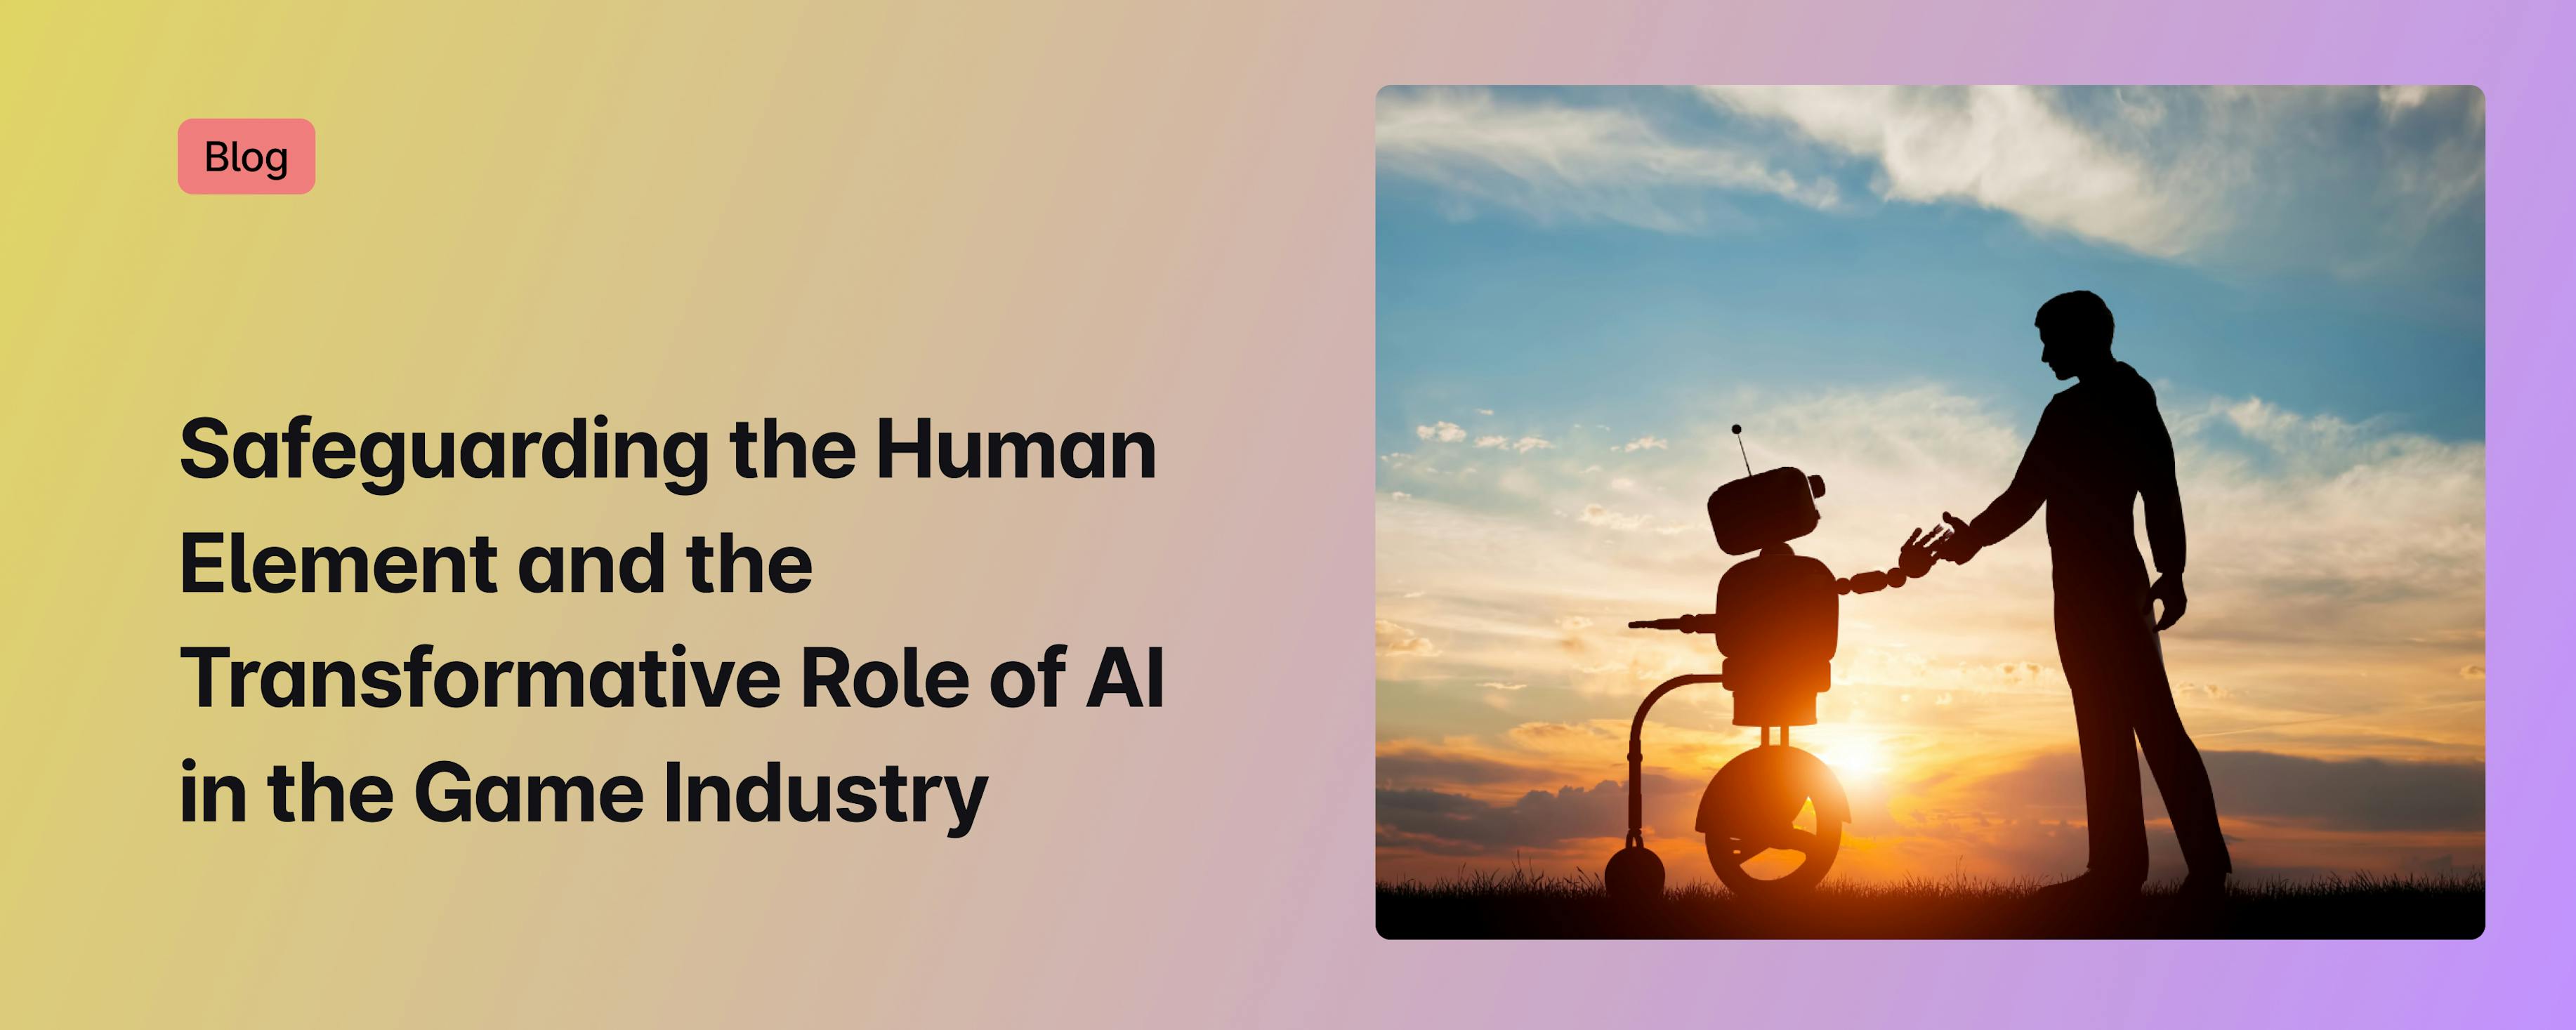 Safeguarding the Human Element and the Transformative Role of AI in the Game Industry